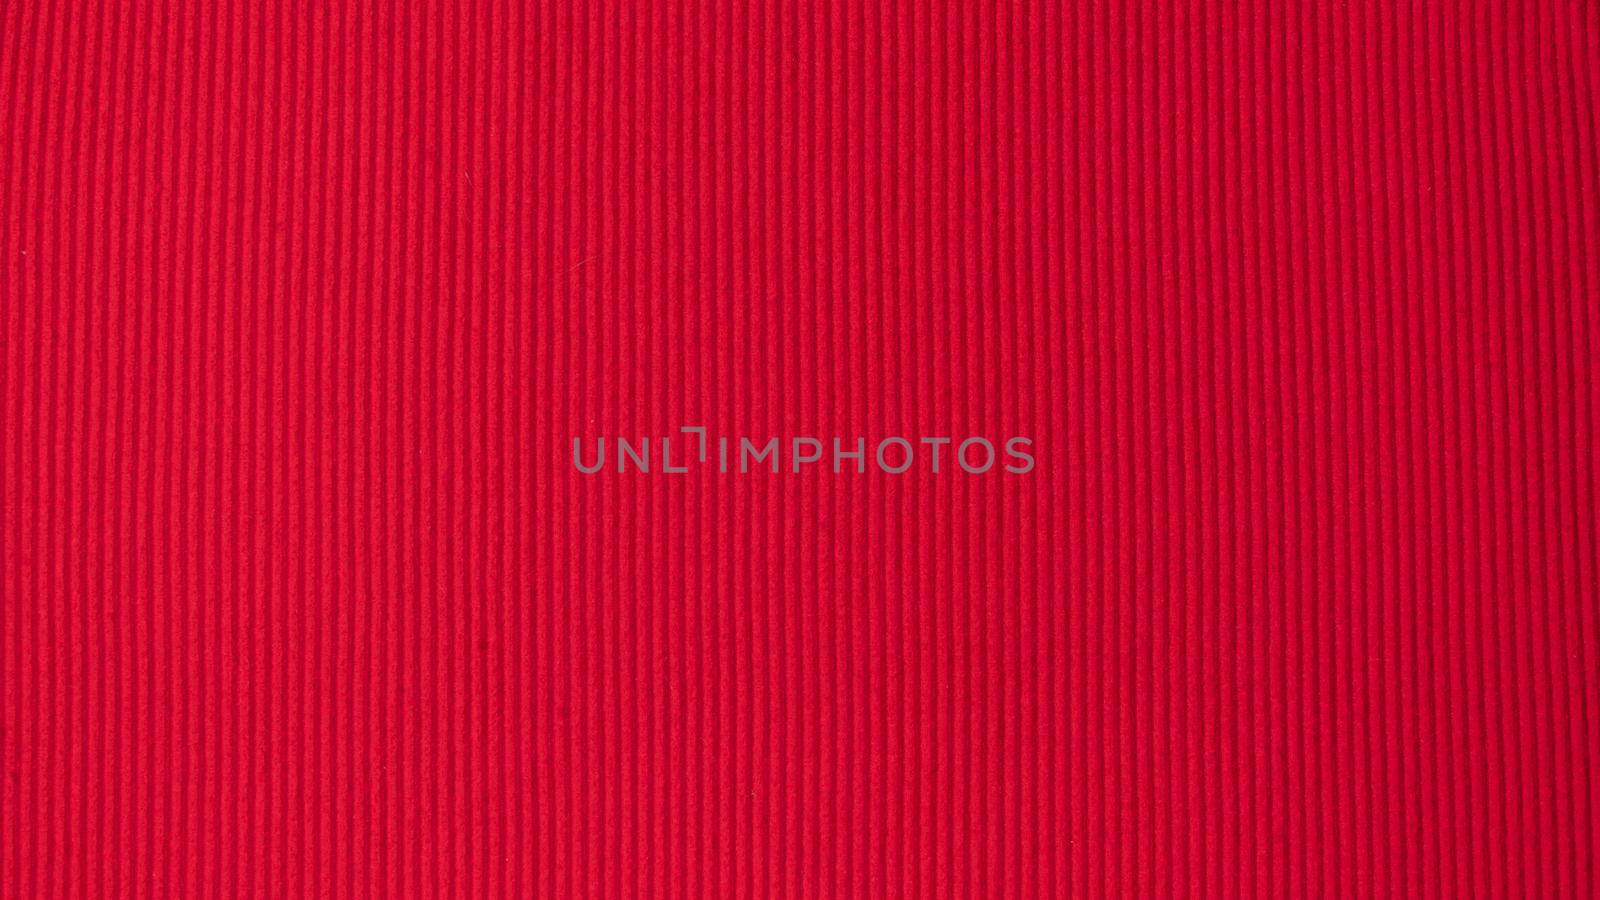 Red textured background with vertical stripes of furrows by voktybre